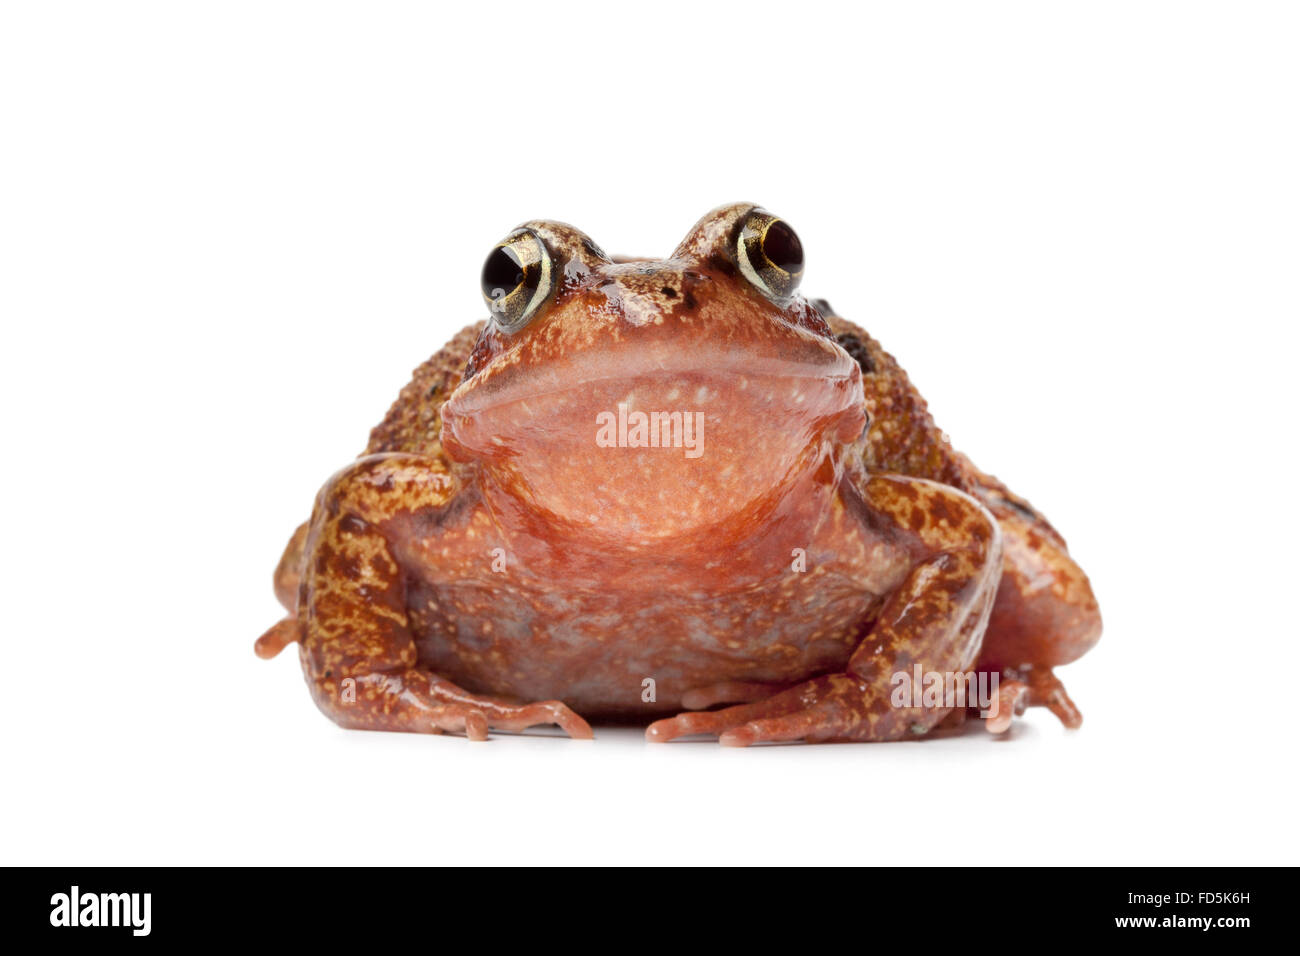 Single brown frog en face on white background Stock Photo